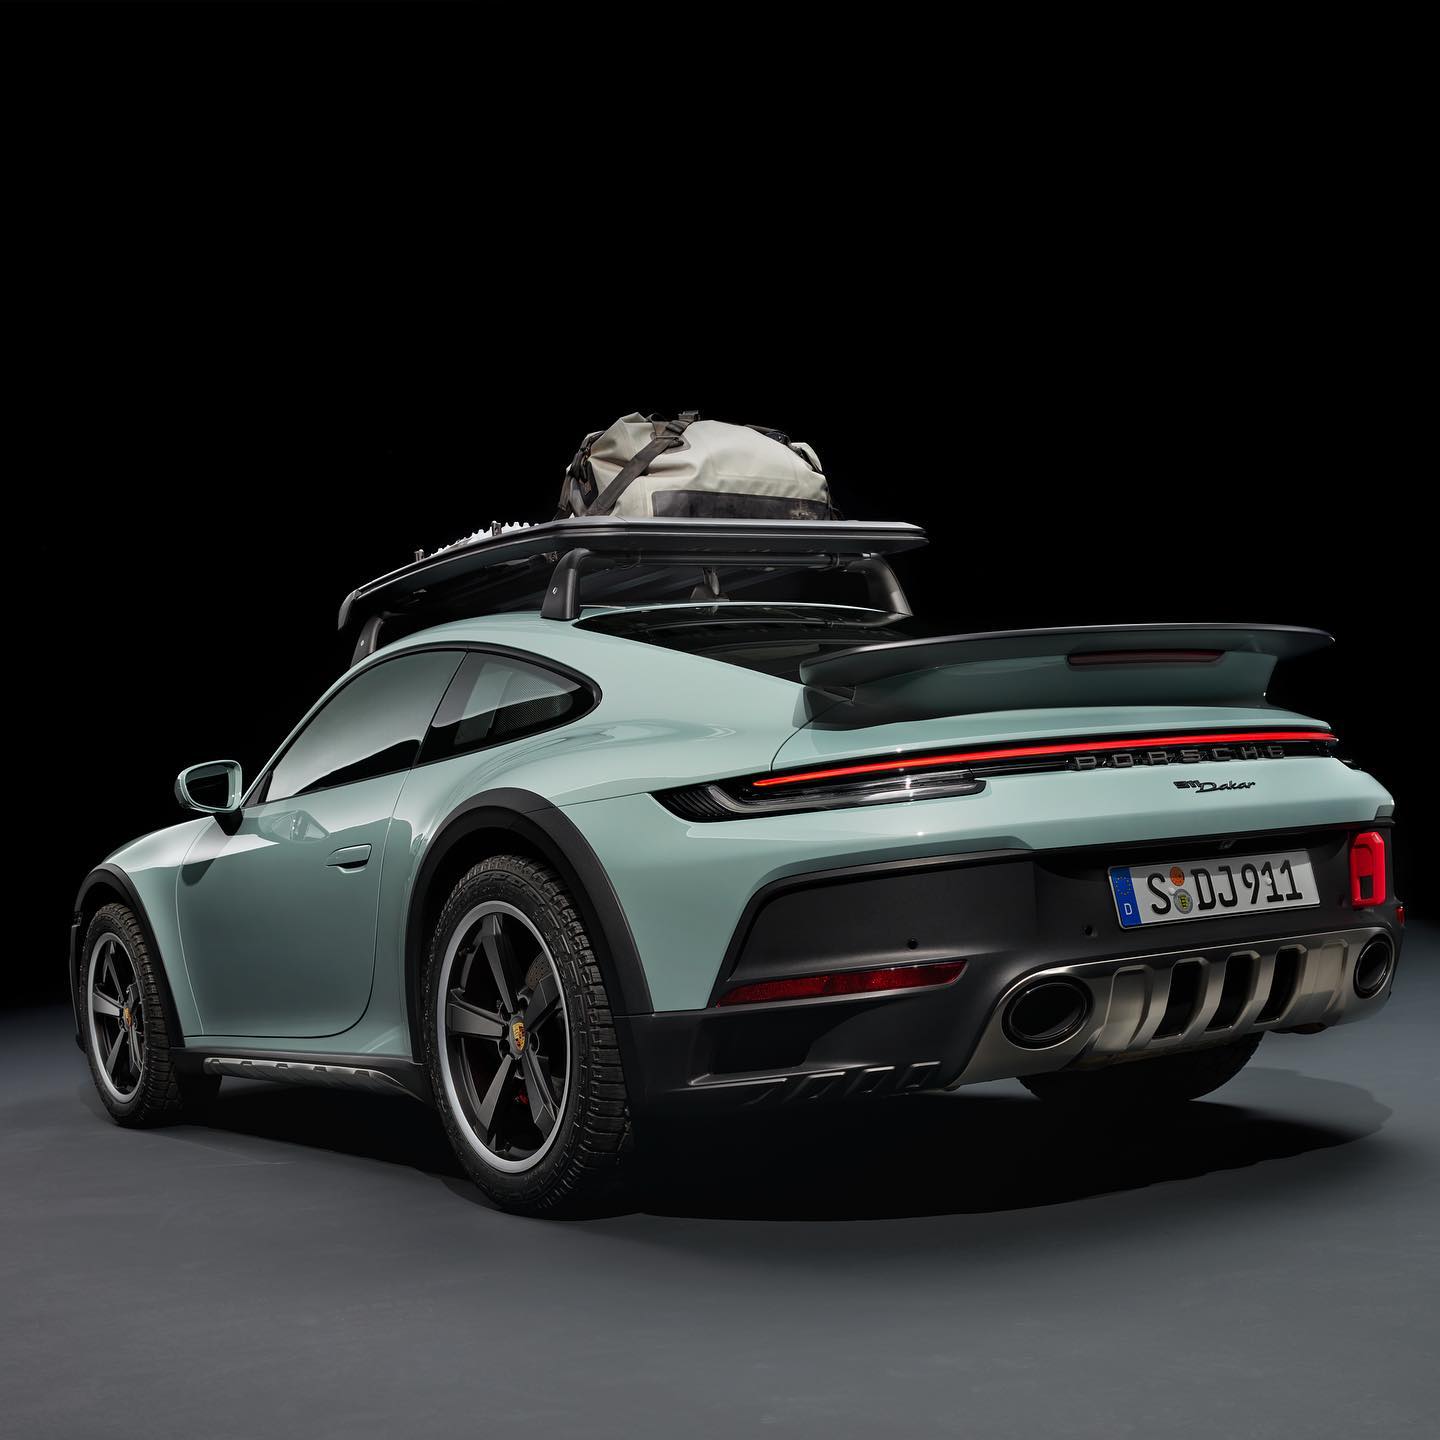 The perfect go-anywhere @porsche? The brand new #911Dakar is essentially a toughened up, high-riding, Carrera 4 GTS coupé. That means a 475bhp 3.0-litre twin-turbo flat six at the back, four wheel drive, four seats and the knowledge that you’ll smoke a Urus both on an off-road? Hell, yes!